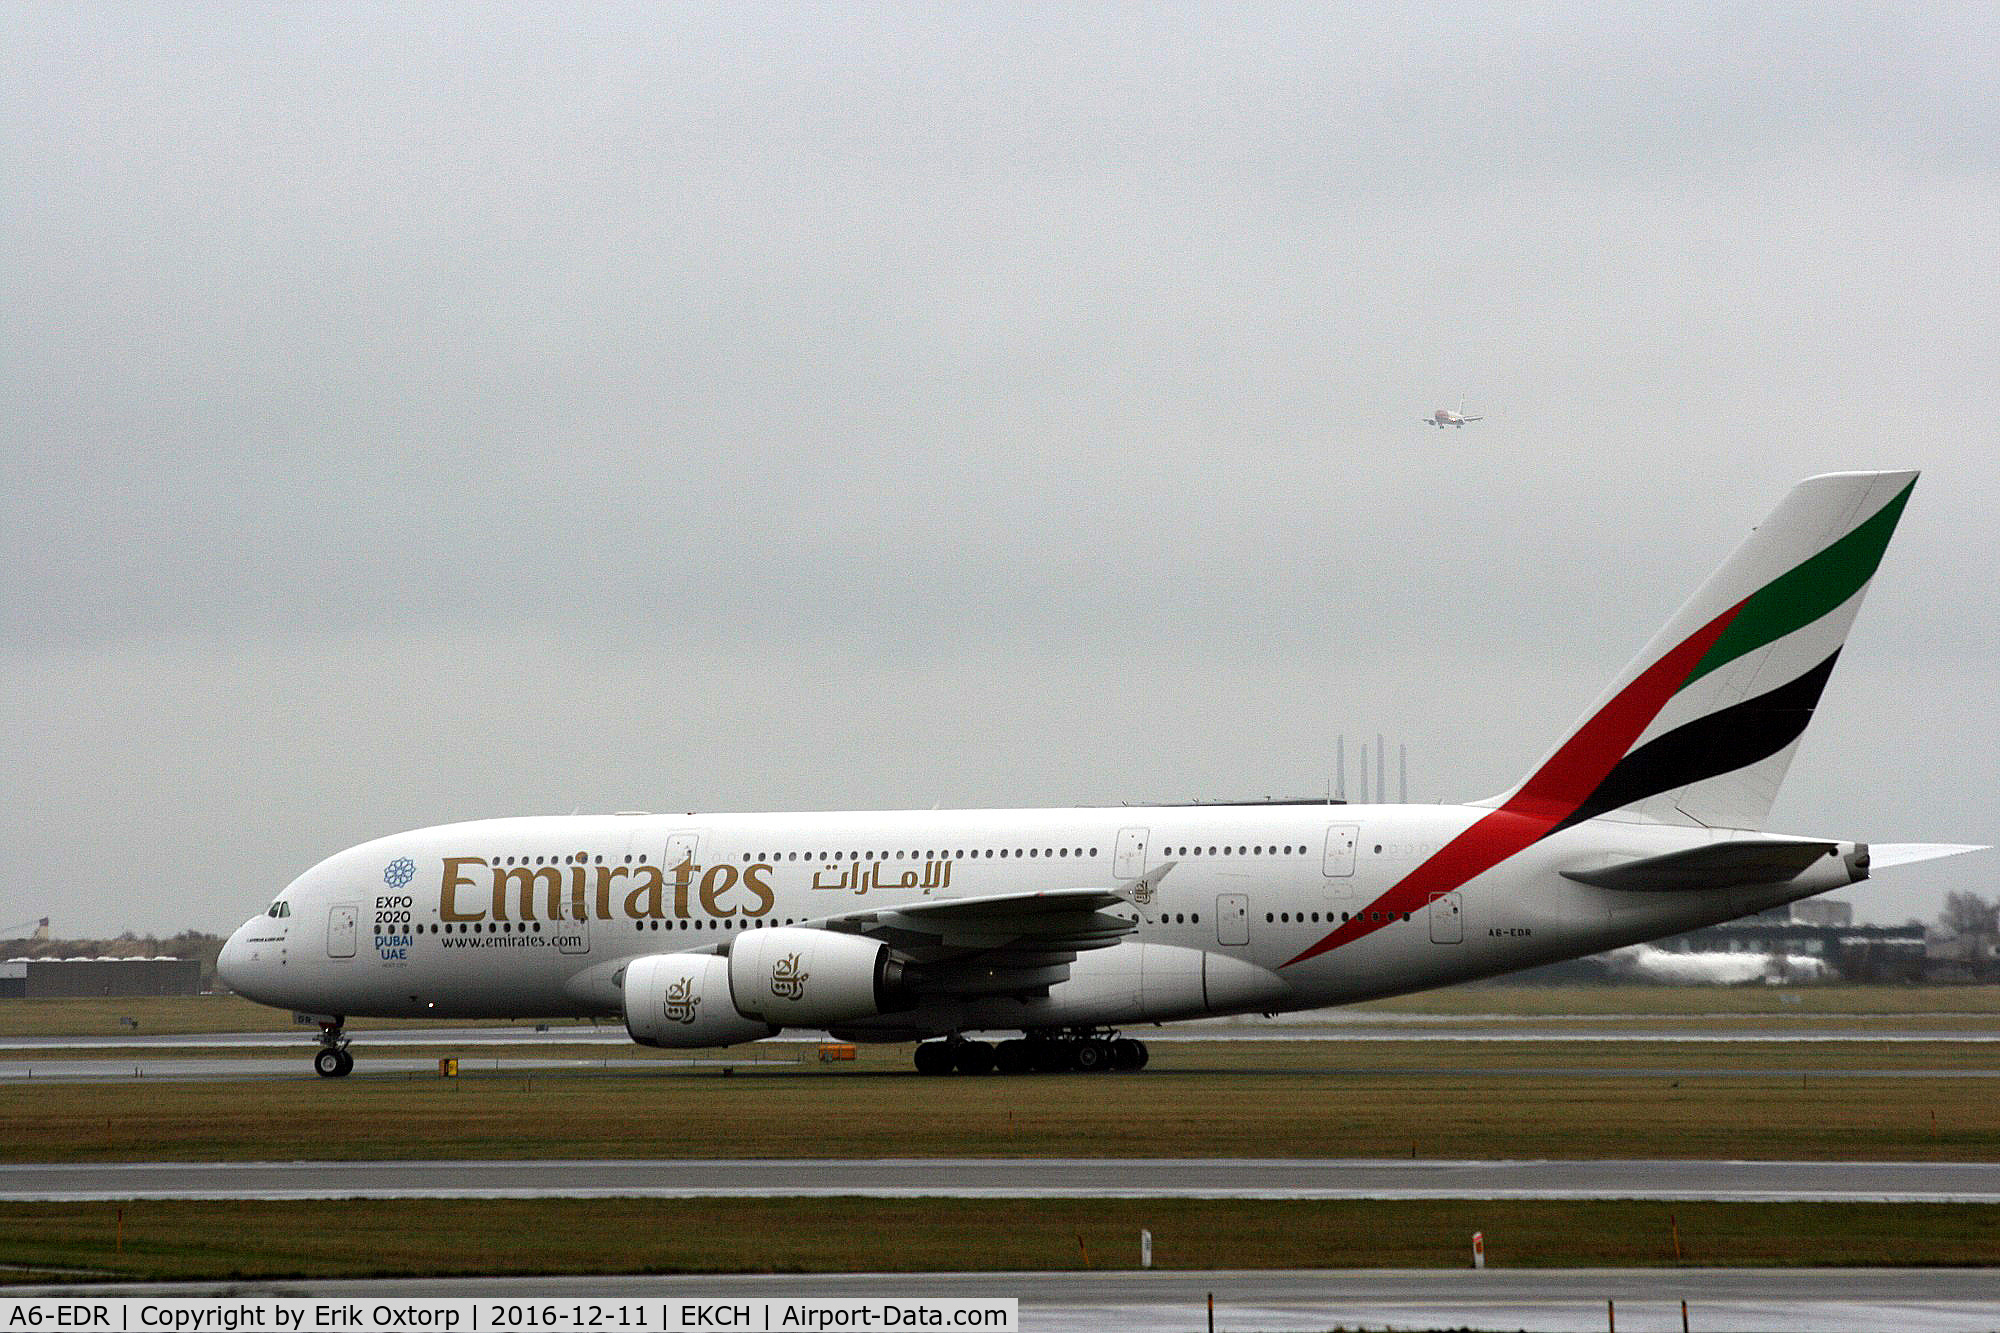 A6-EDR, 2011 Airbus A380-861 C/N 083, A6-EDR just landed rw 22L